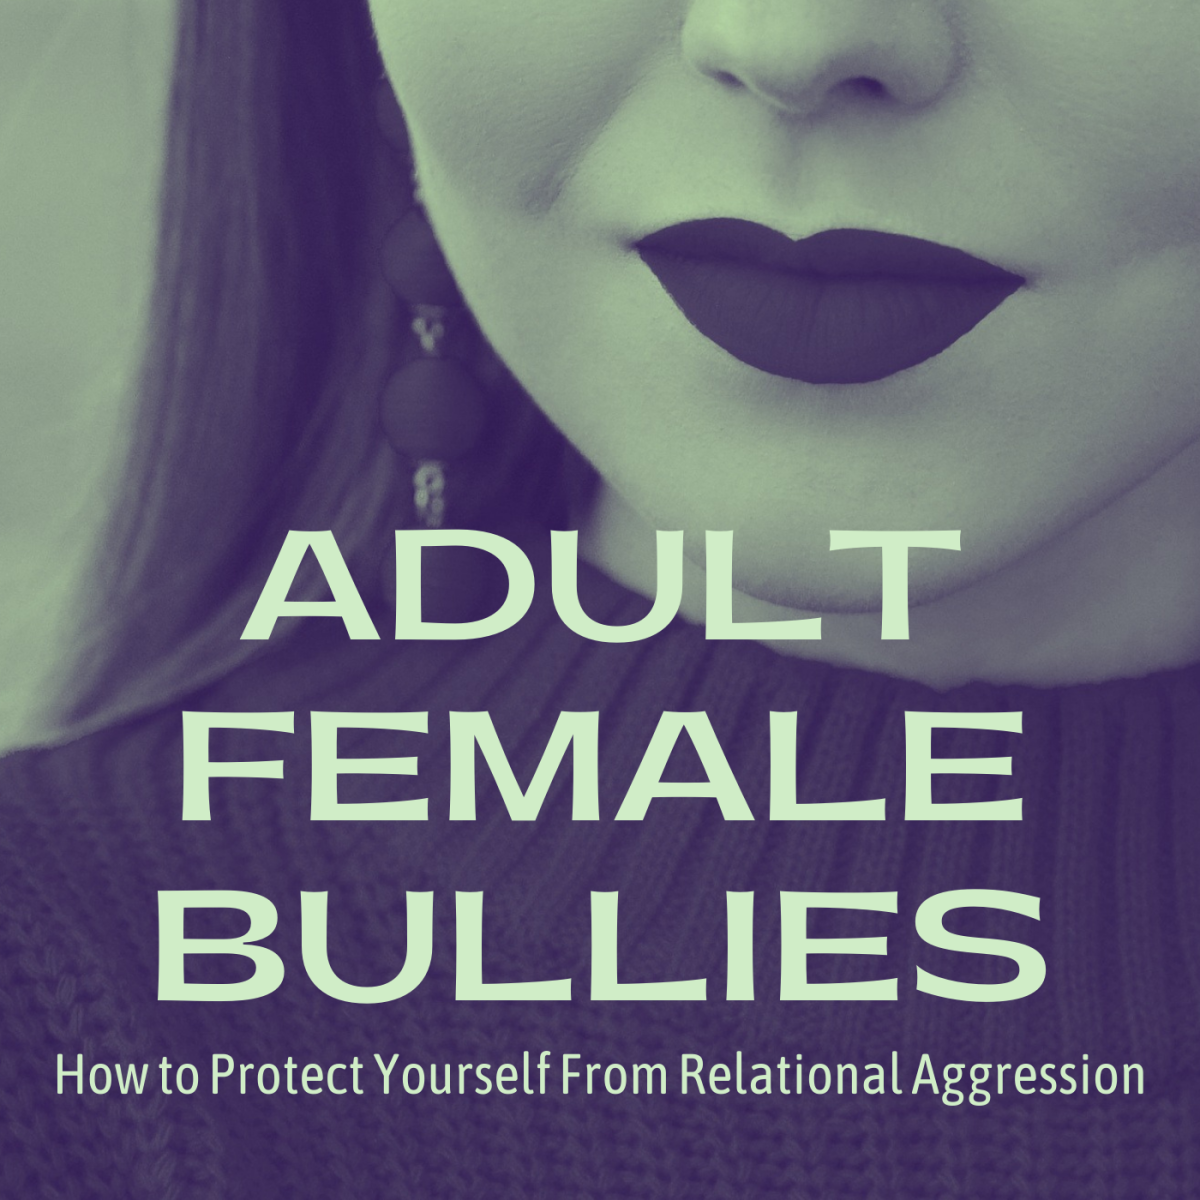 Learn how grown-up bullies operate and how you can protect yourself from them.